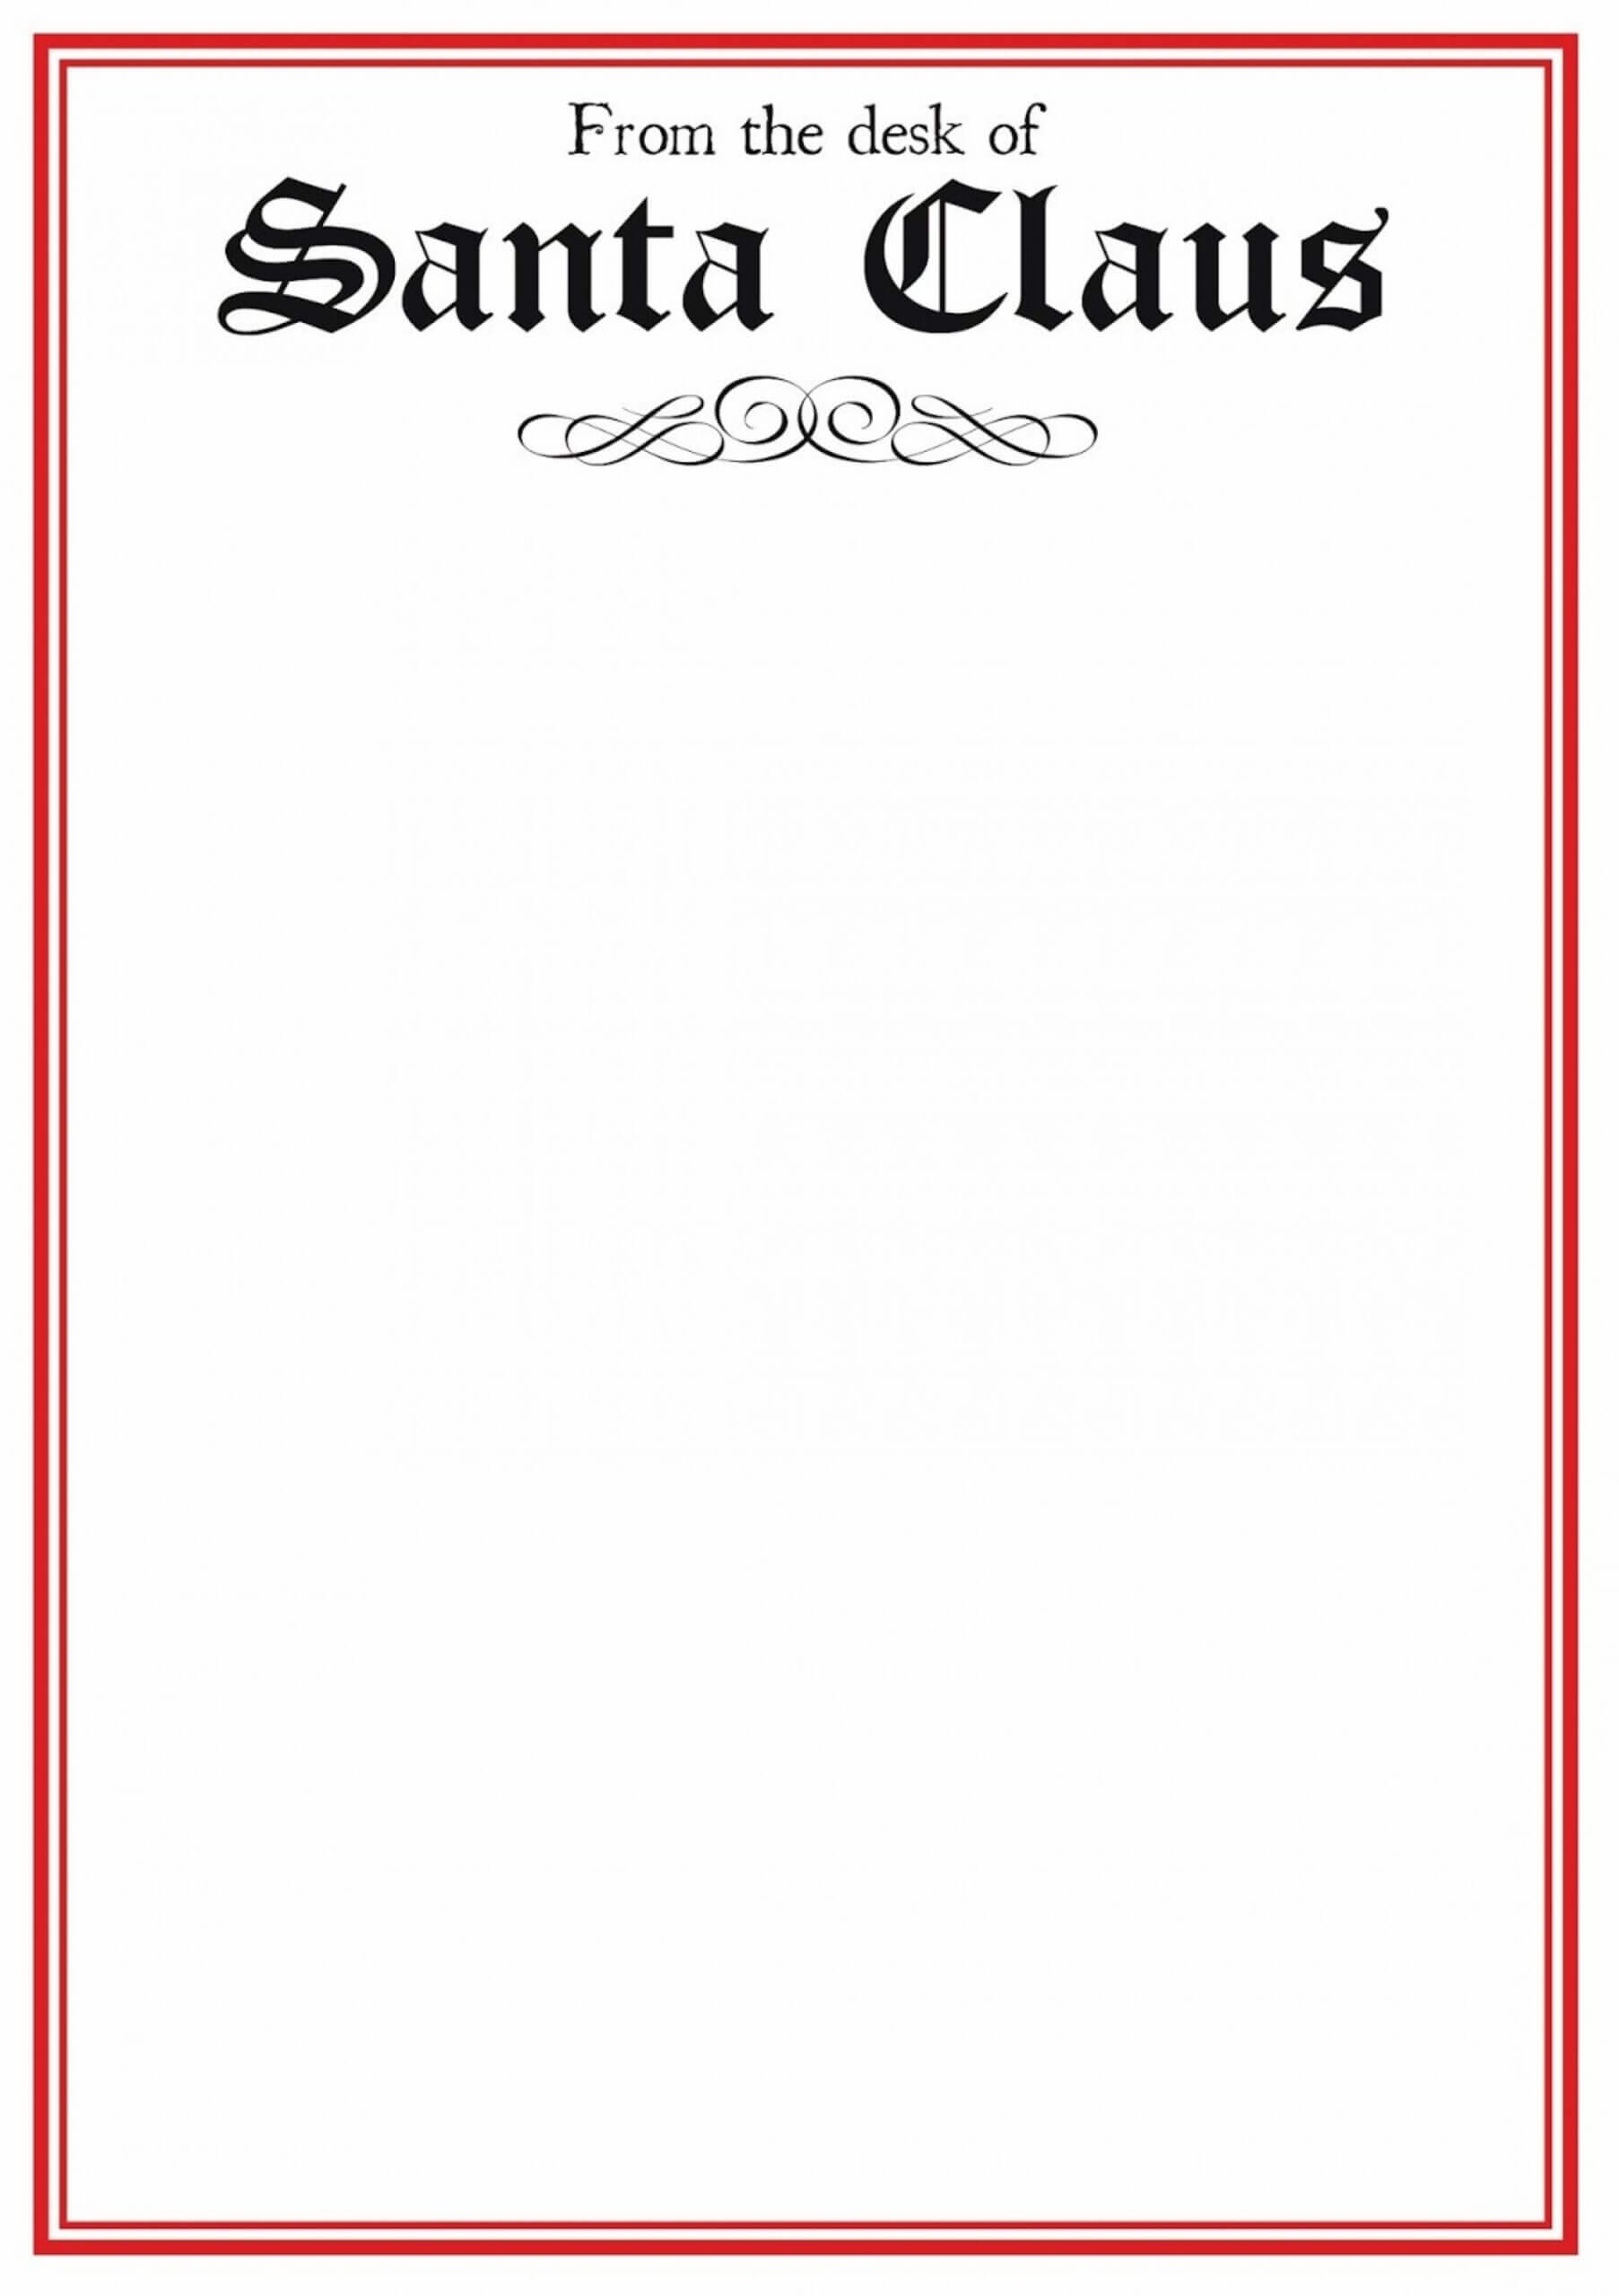 011 Free Letterom Santa Template Microsoft Word Ideas Claus With Regard To Santa Letter Template Word